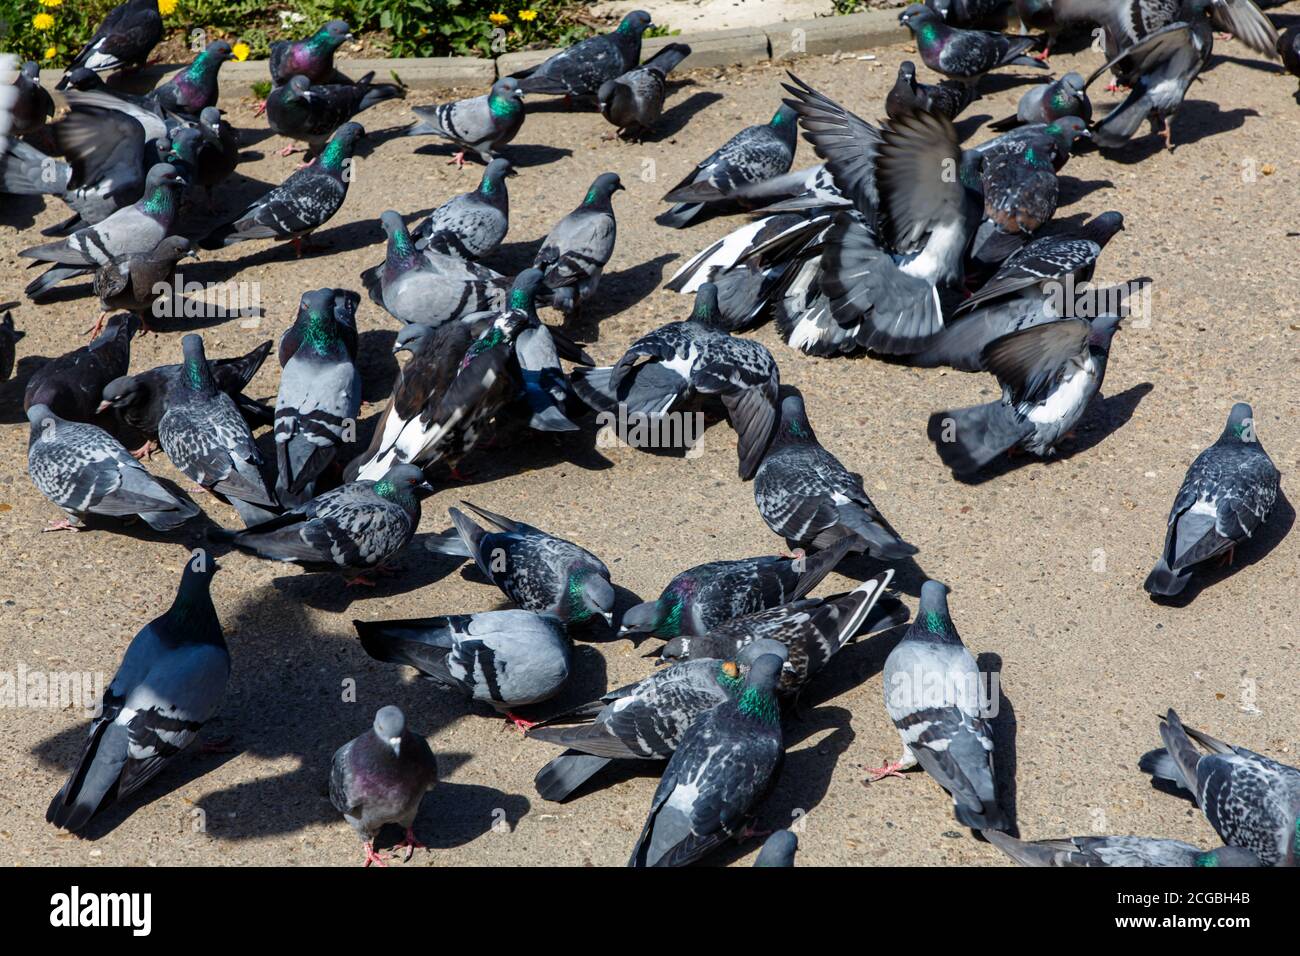 A flock of pigeons on the path in the Park. Stock Photo